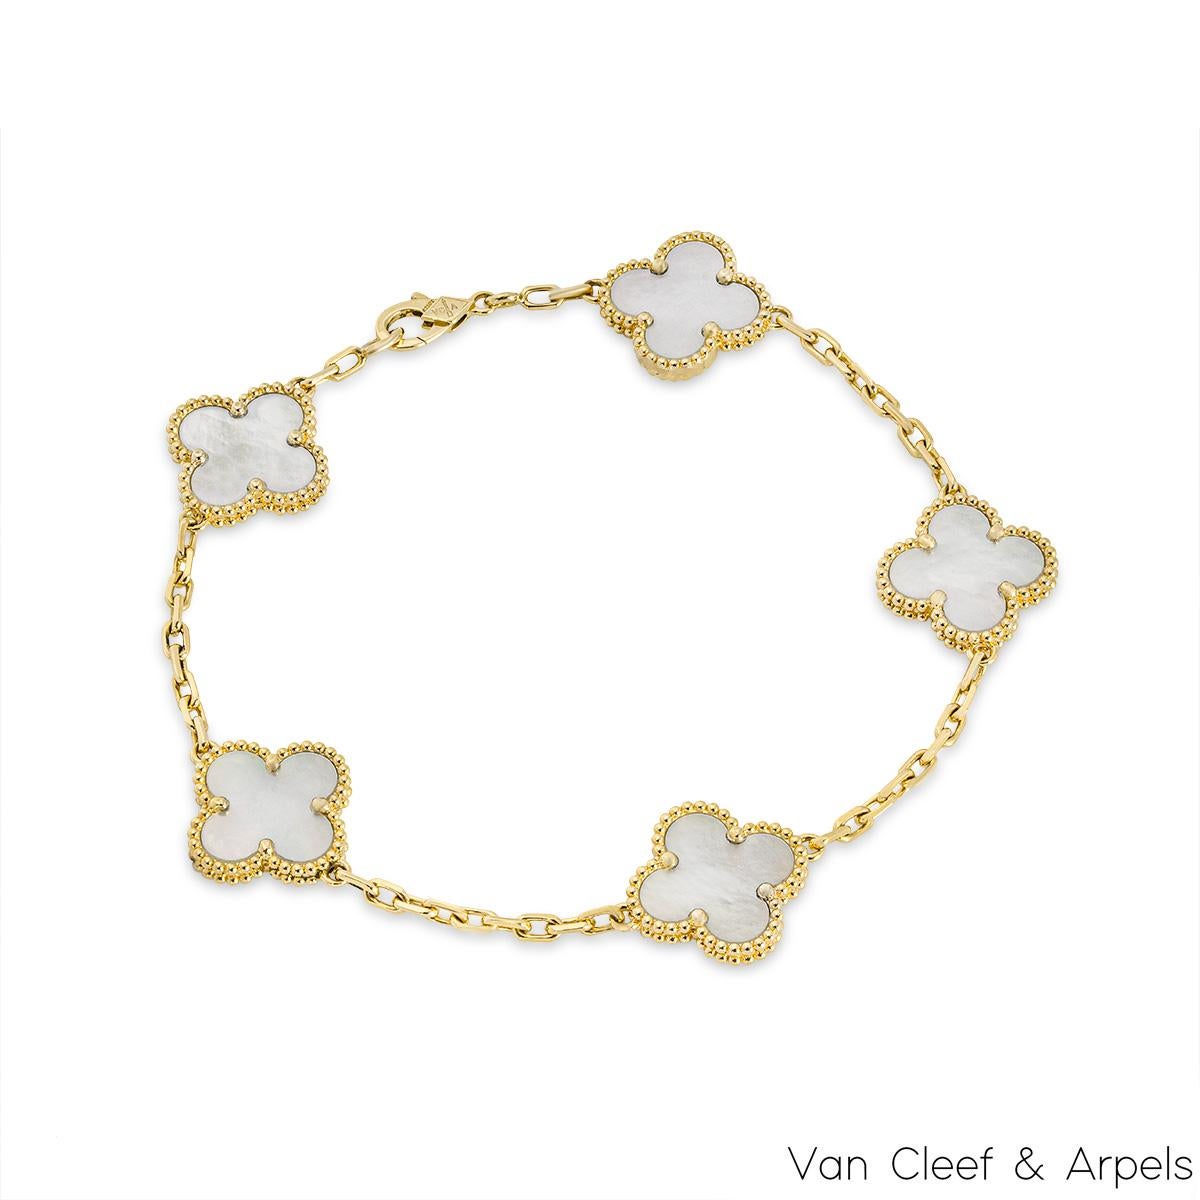 A gorgeous 18k yellow gold mother of pearl bracelet by Van Cleef and Arpels from the Vintage Alhambra Collection. The stylish bracelet is made up of 5 iconic 4 leaf clover motifs, each set with a mother of pearl inlay and finished with a beaded